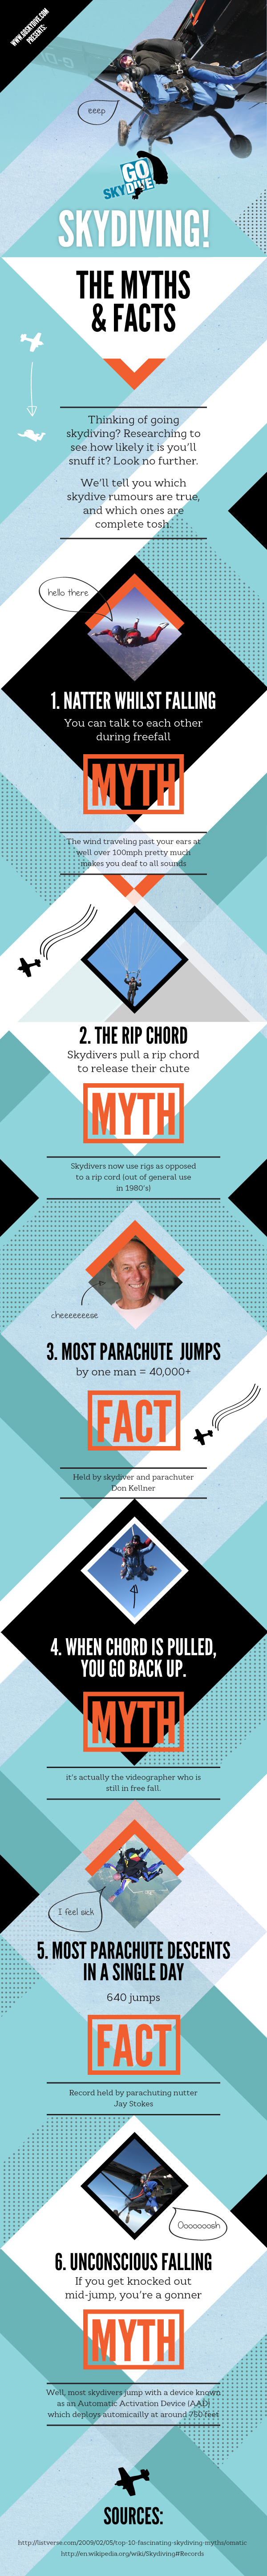 Facts & Myths about Skydiving